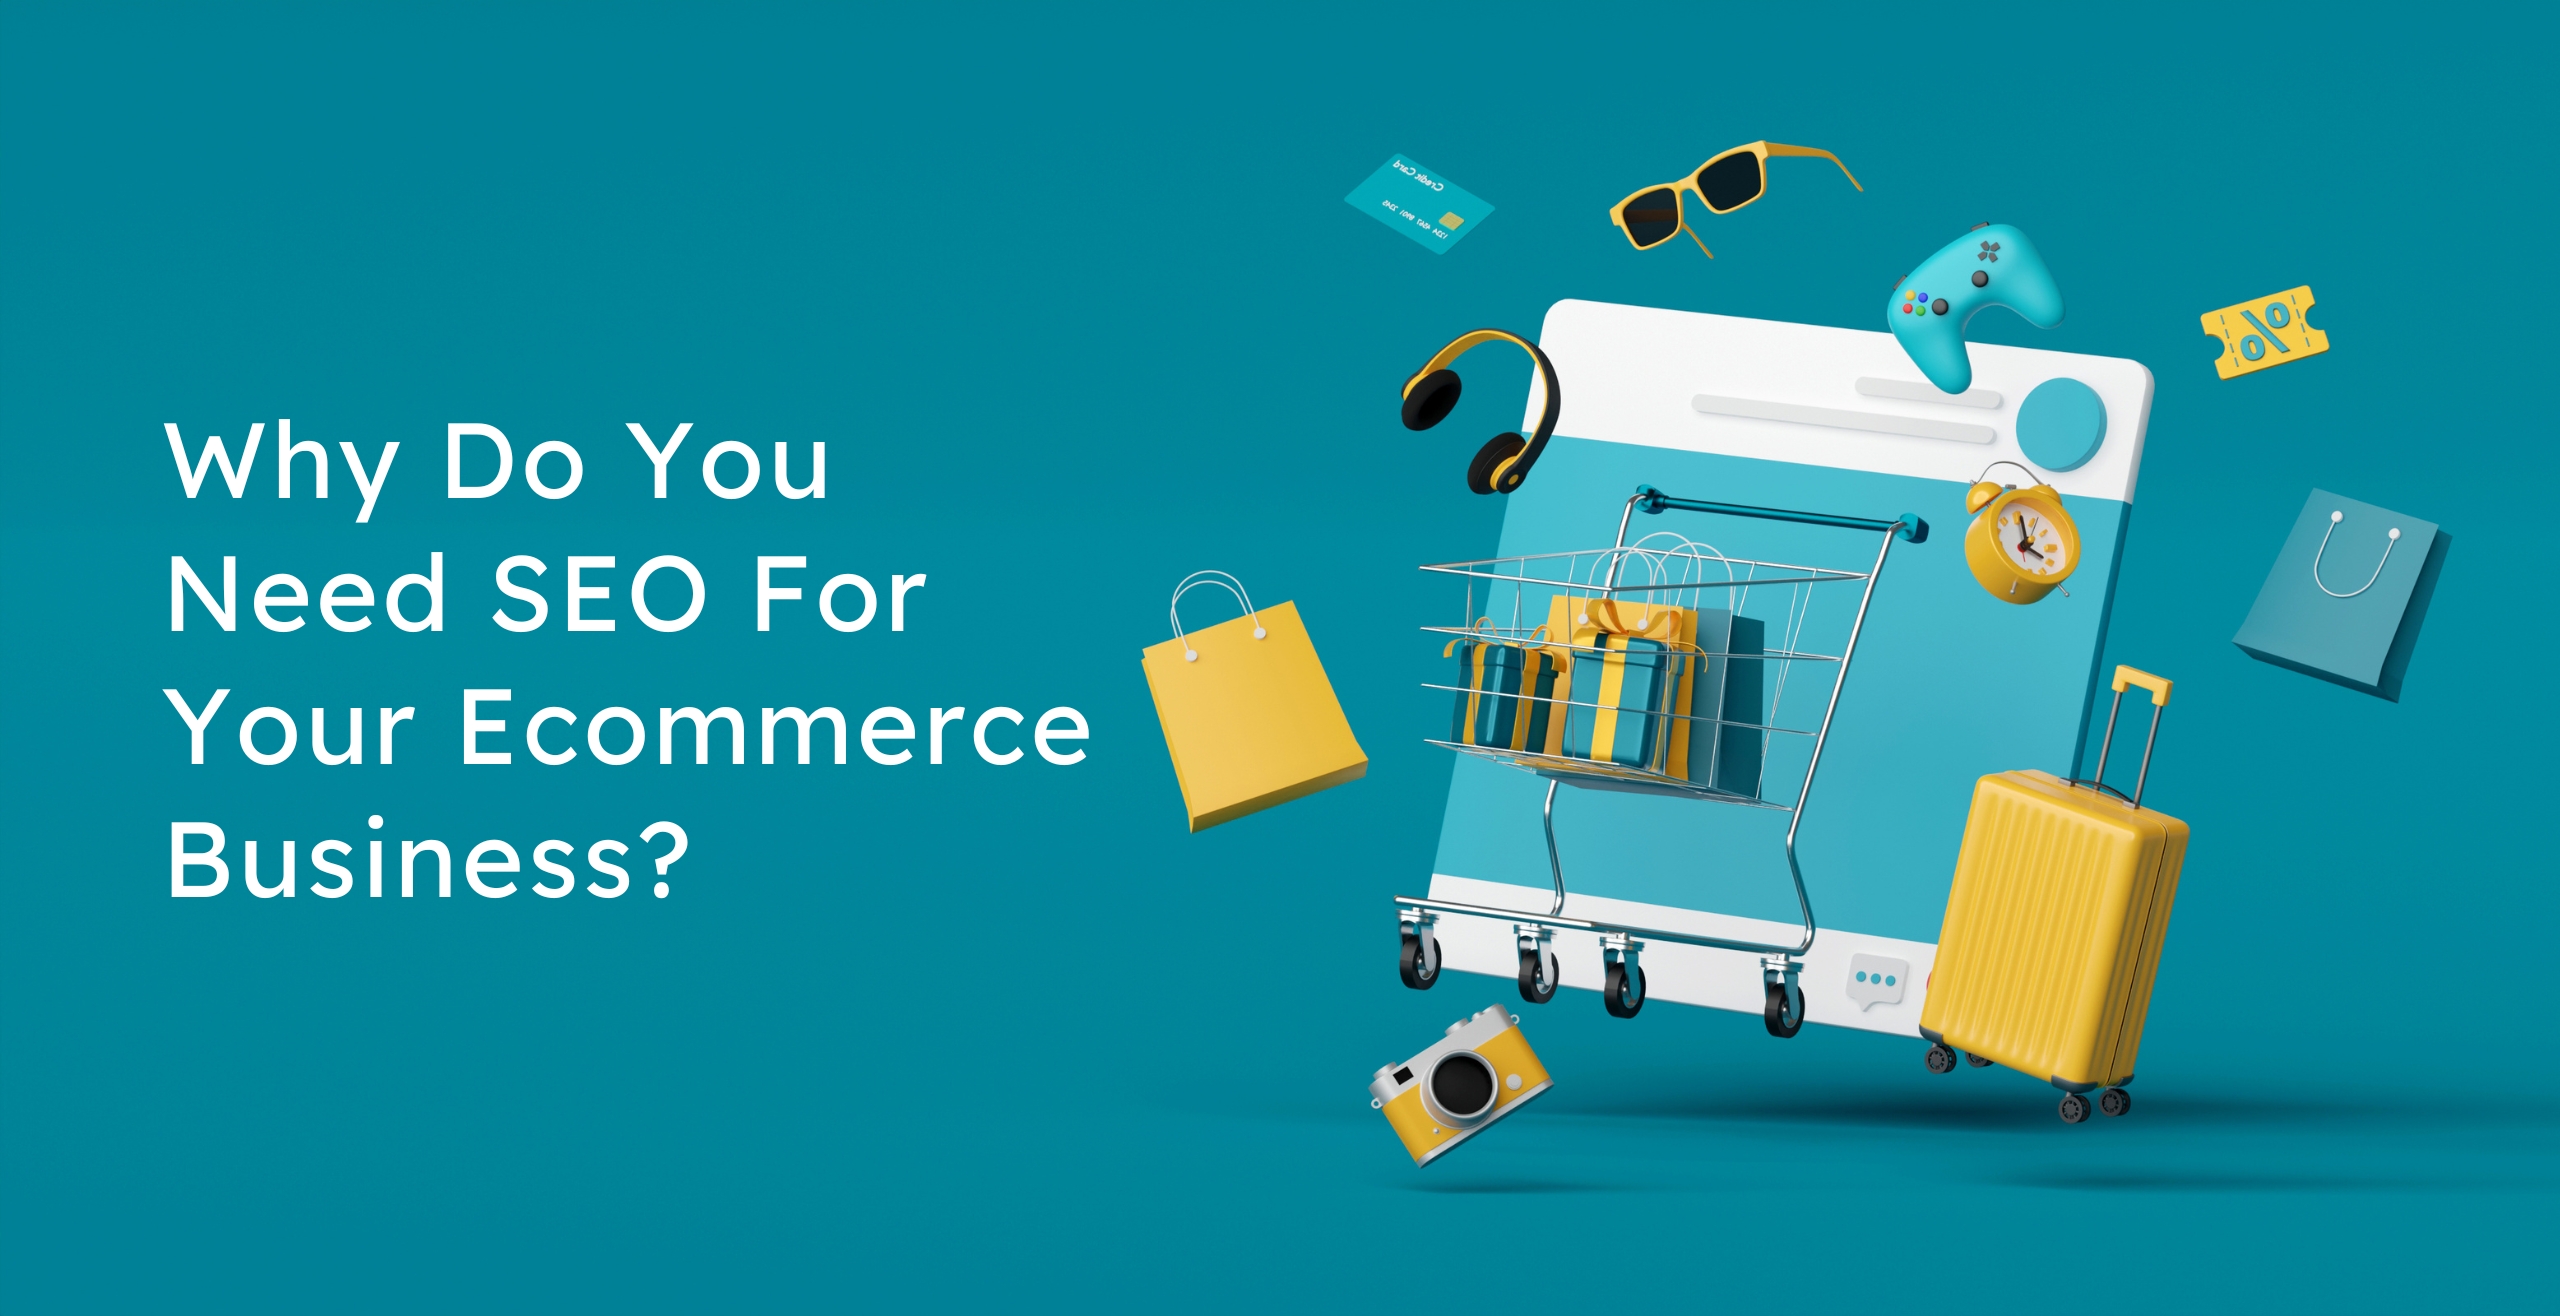 What are Ecommerce SEO Services And Why Do You Need Them?